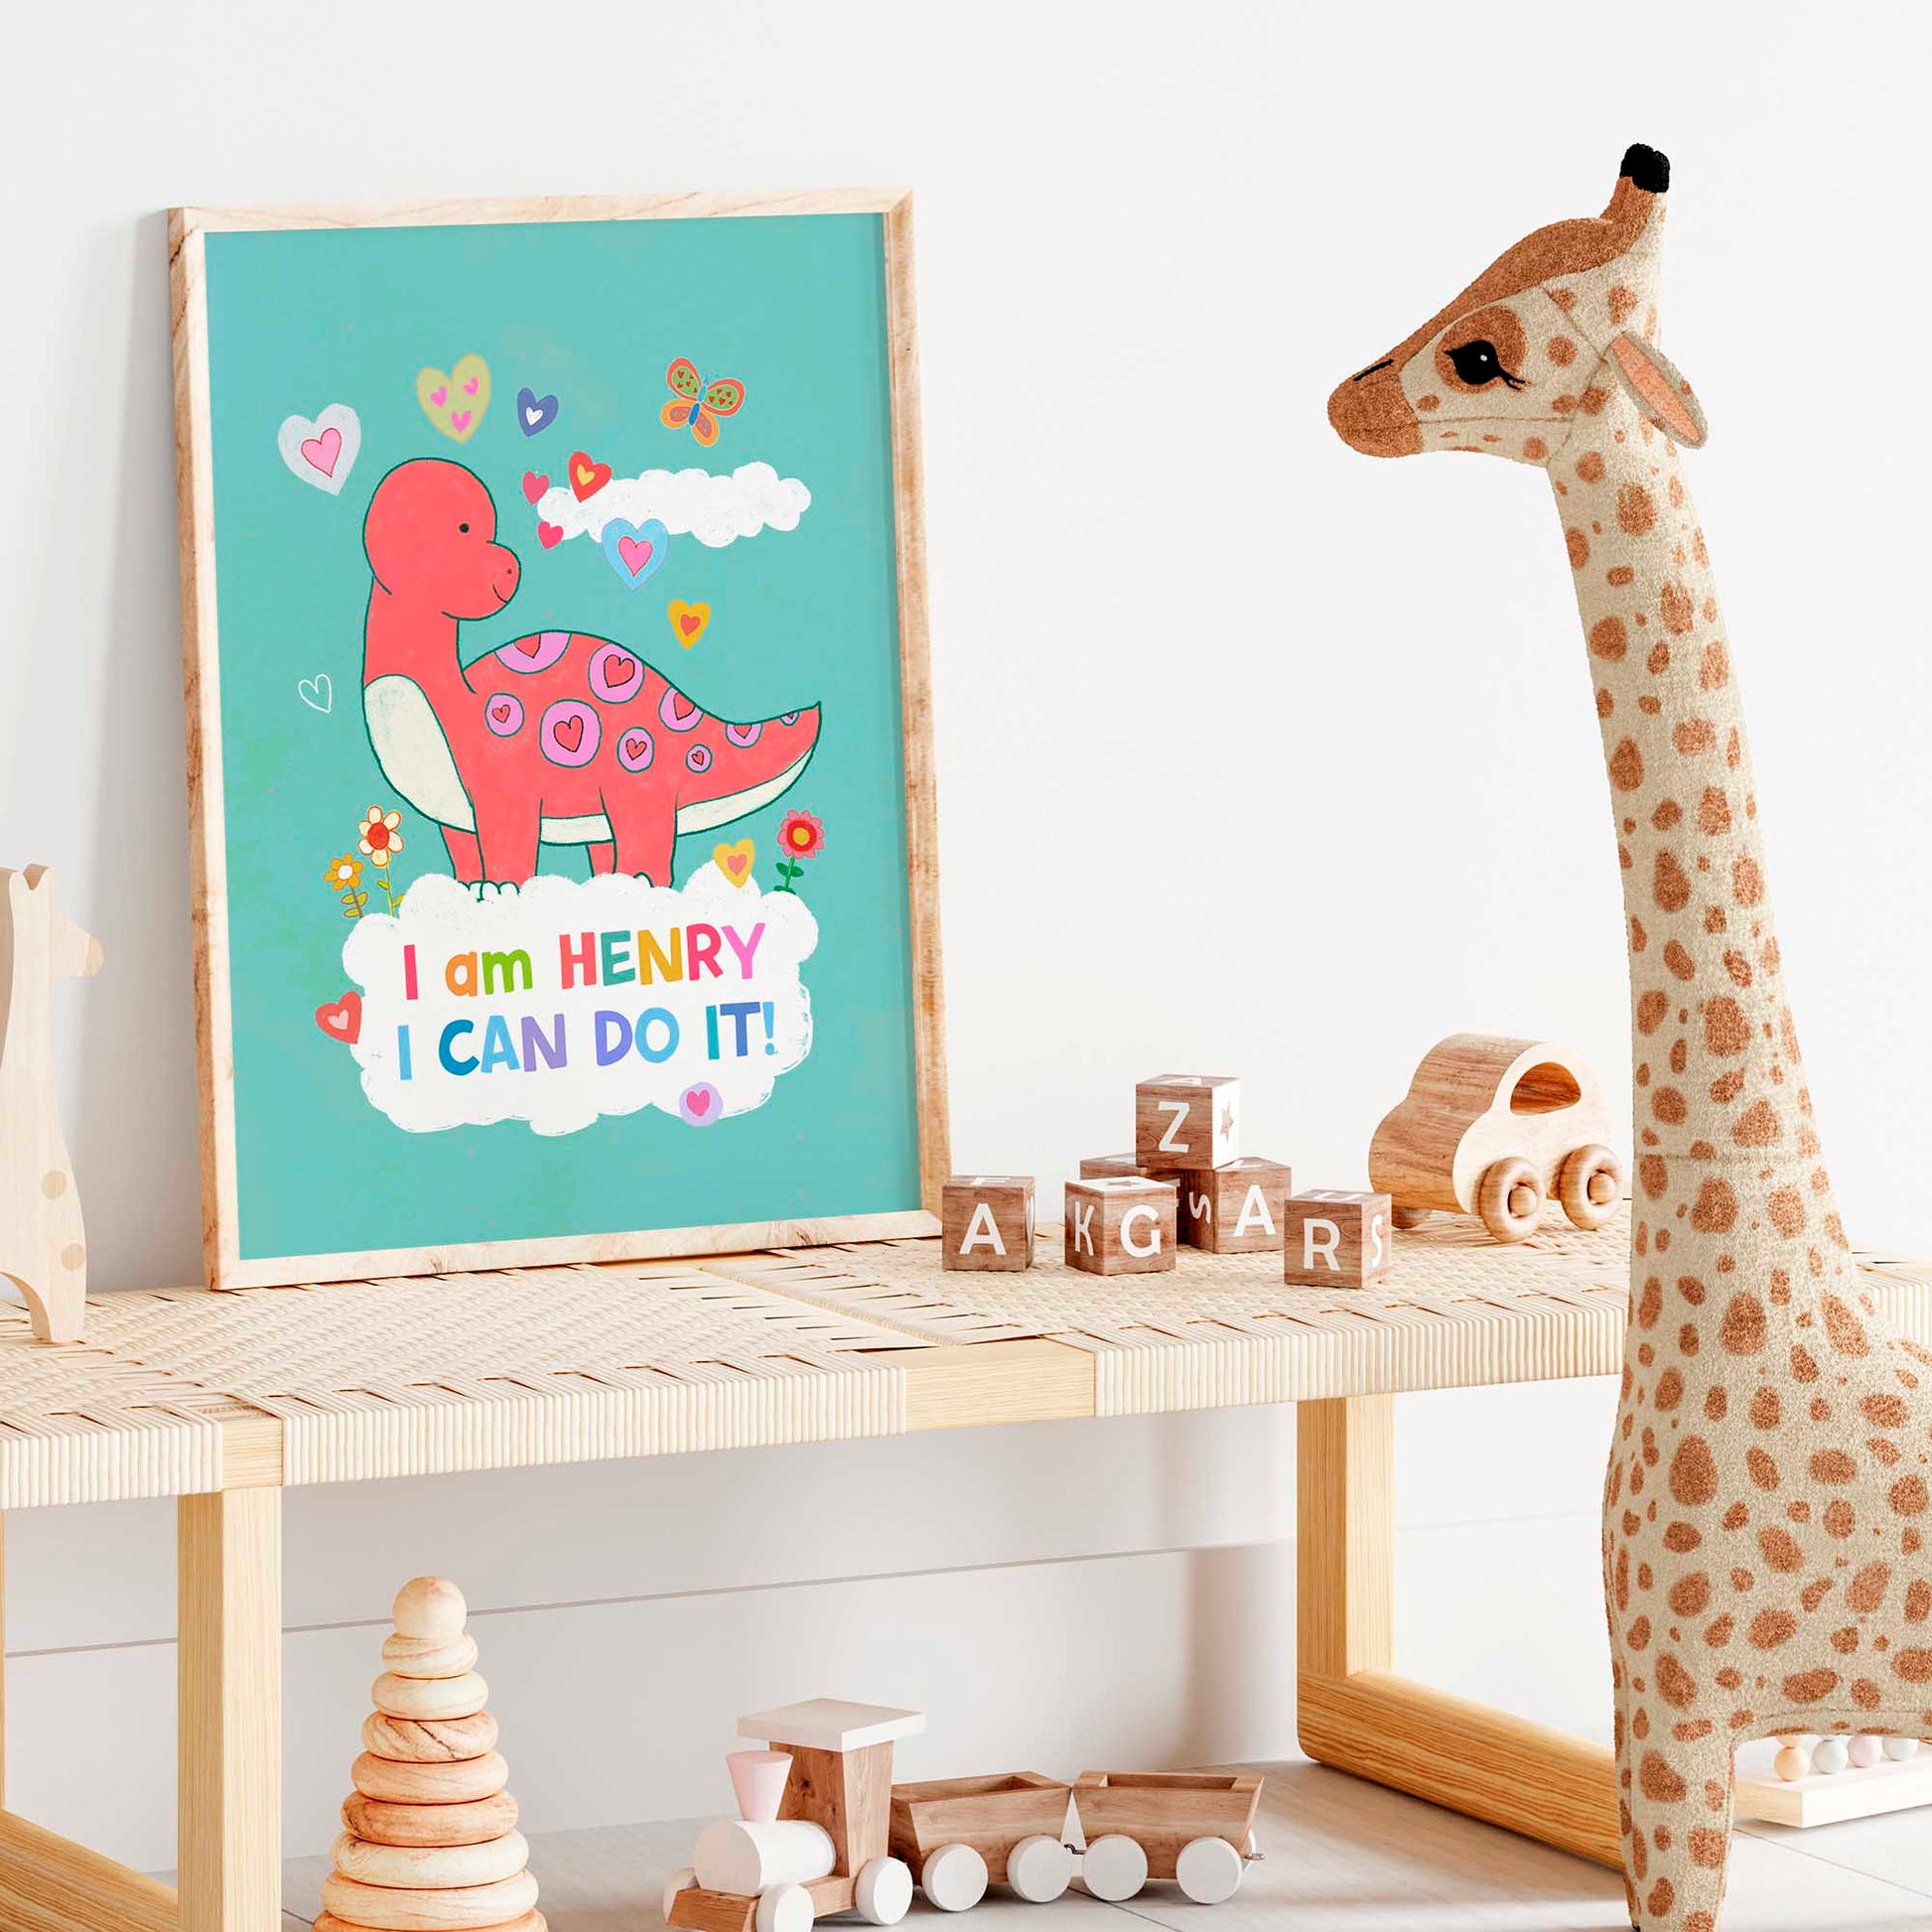 Boy's nursery enhanced with dinosaur framed art, combining kids' wall art with empowering sayings.